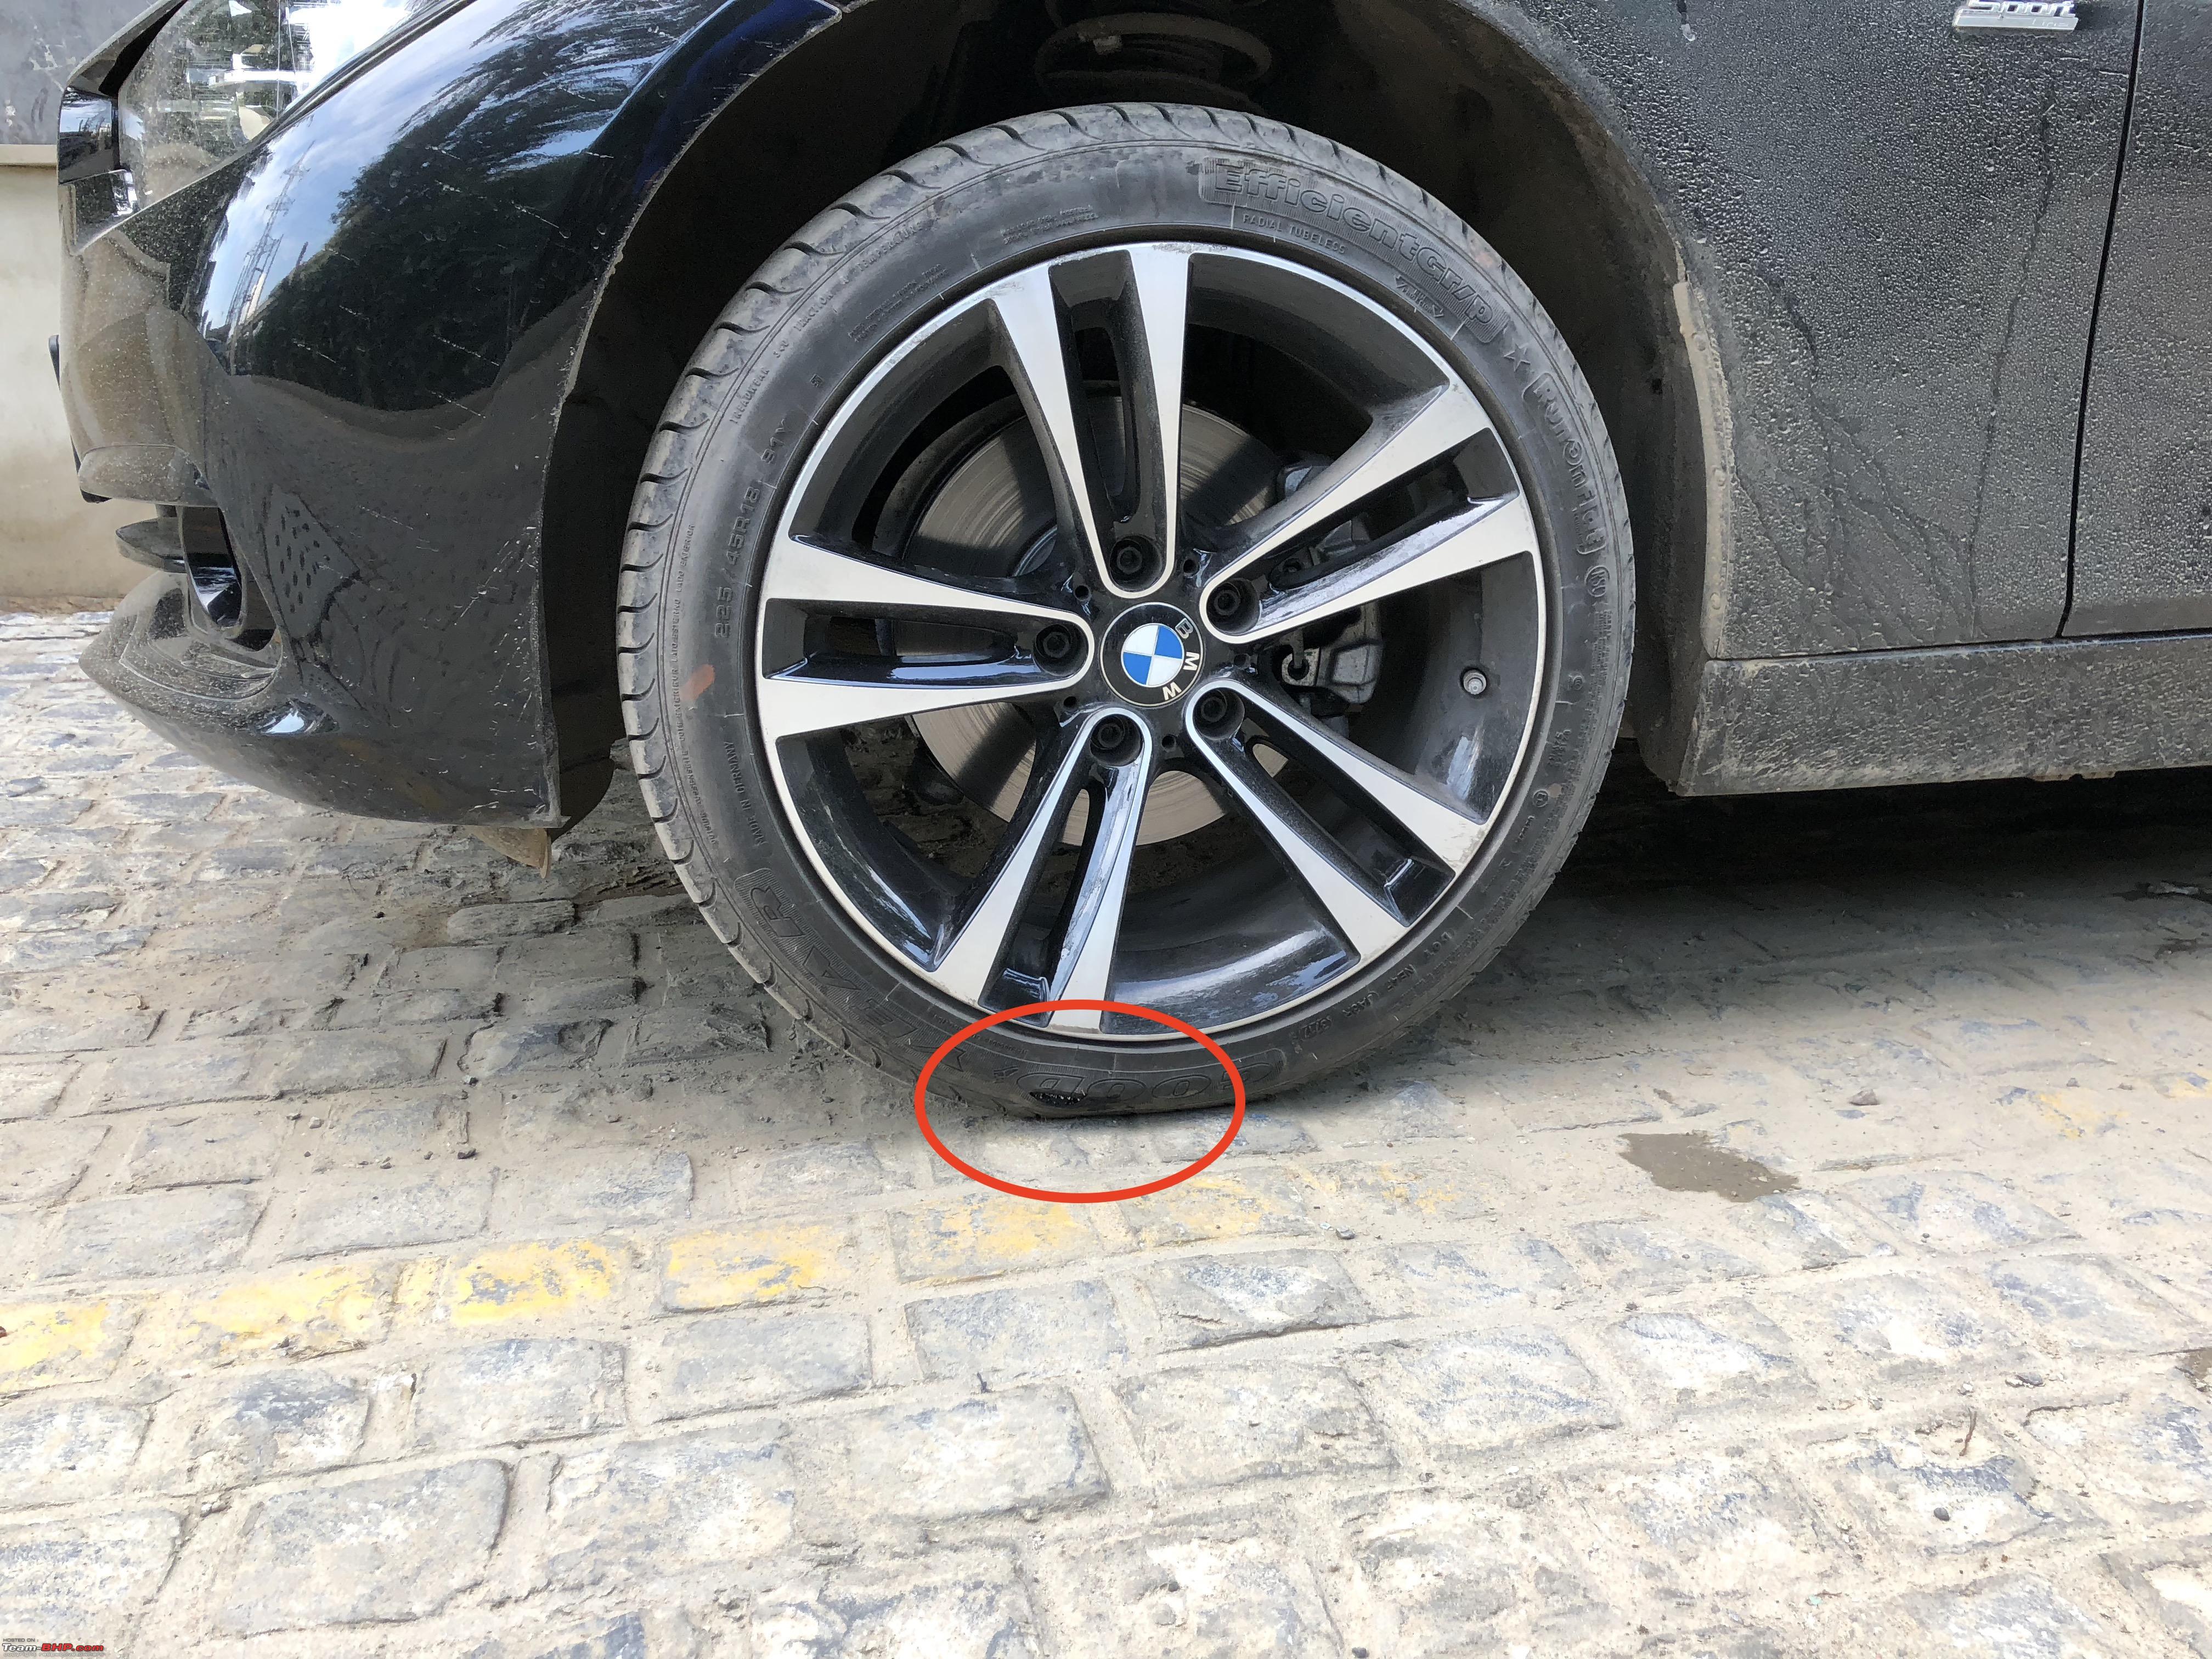 how is bmw handling affected changing from run flat to non run flat tires